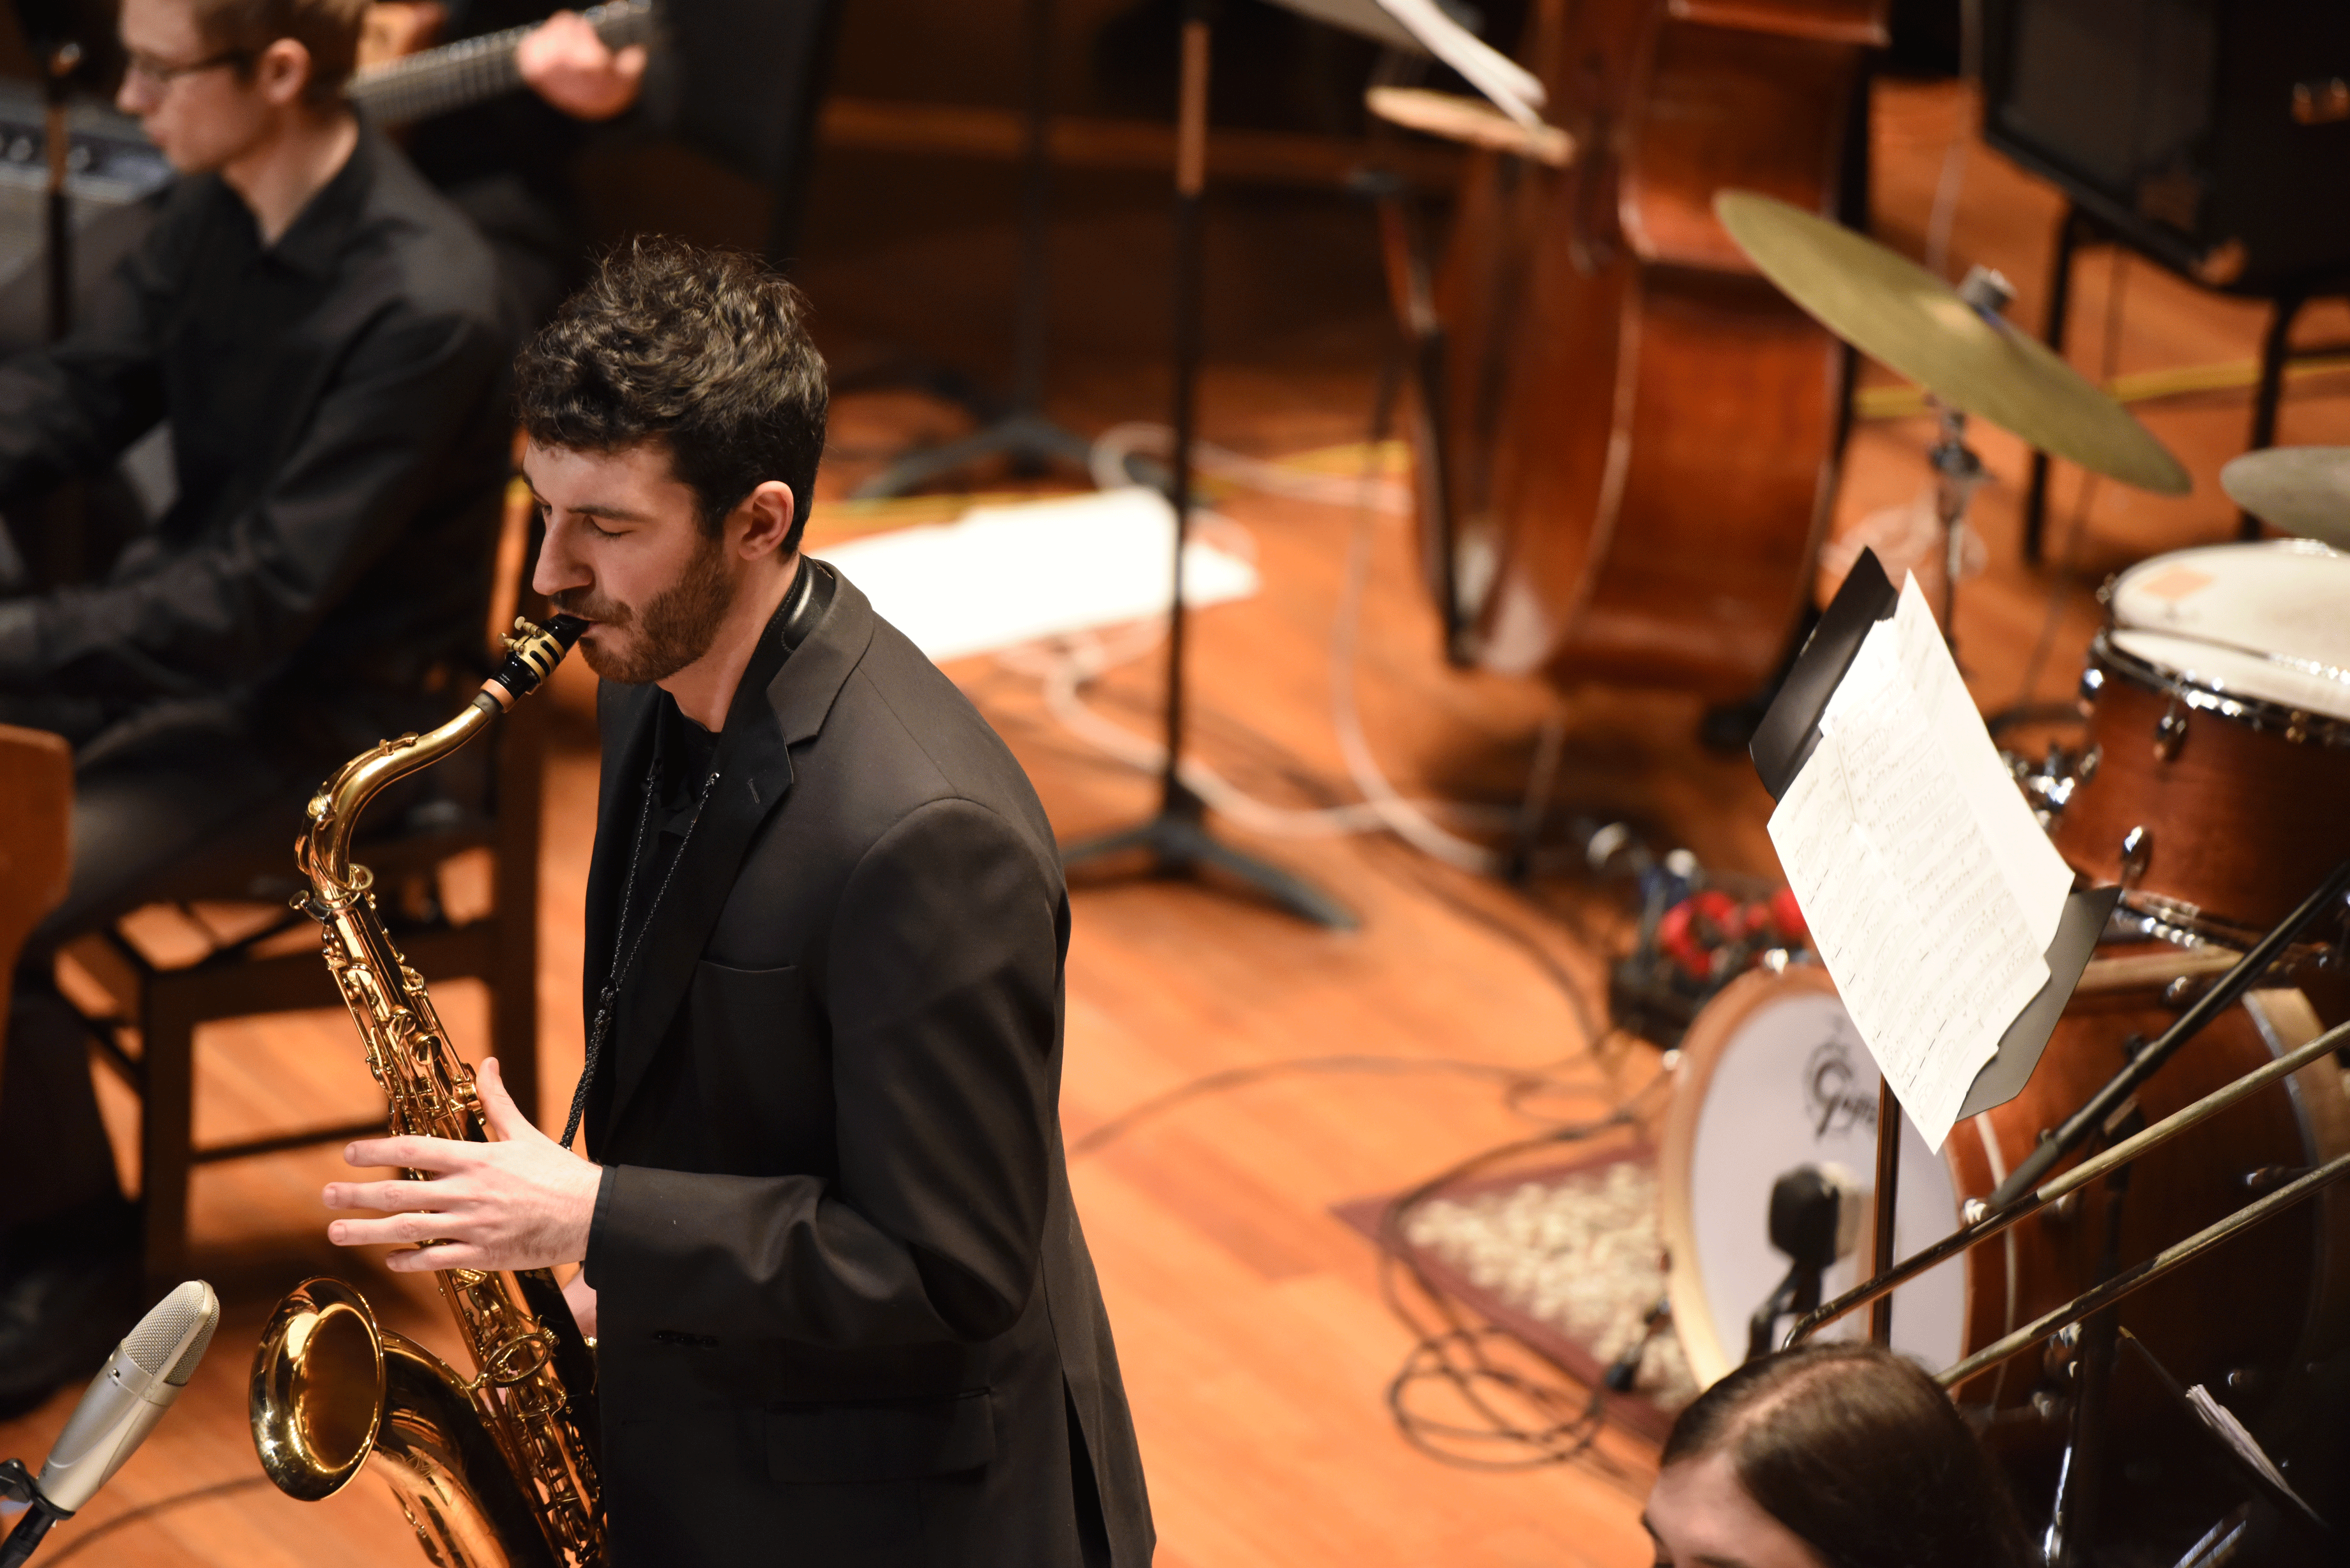 Michael Talento plays the saxophone with the NEC Jazz Orchestra